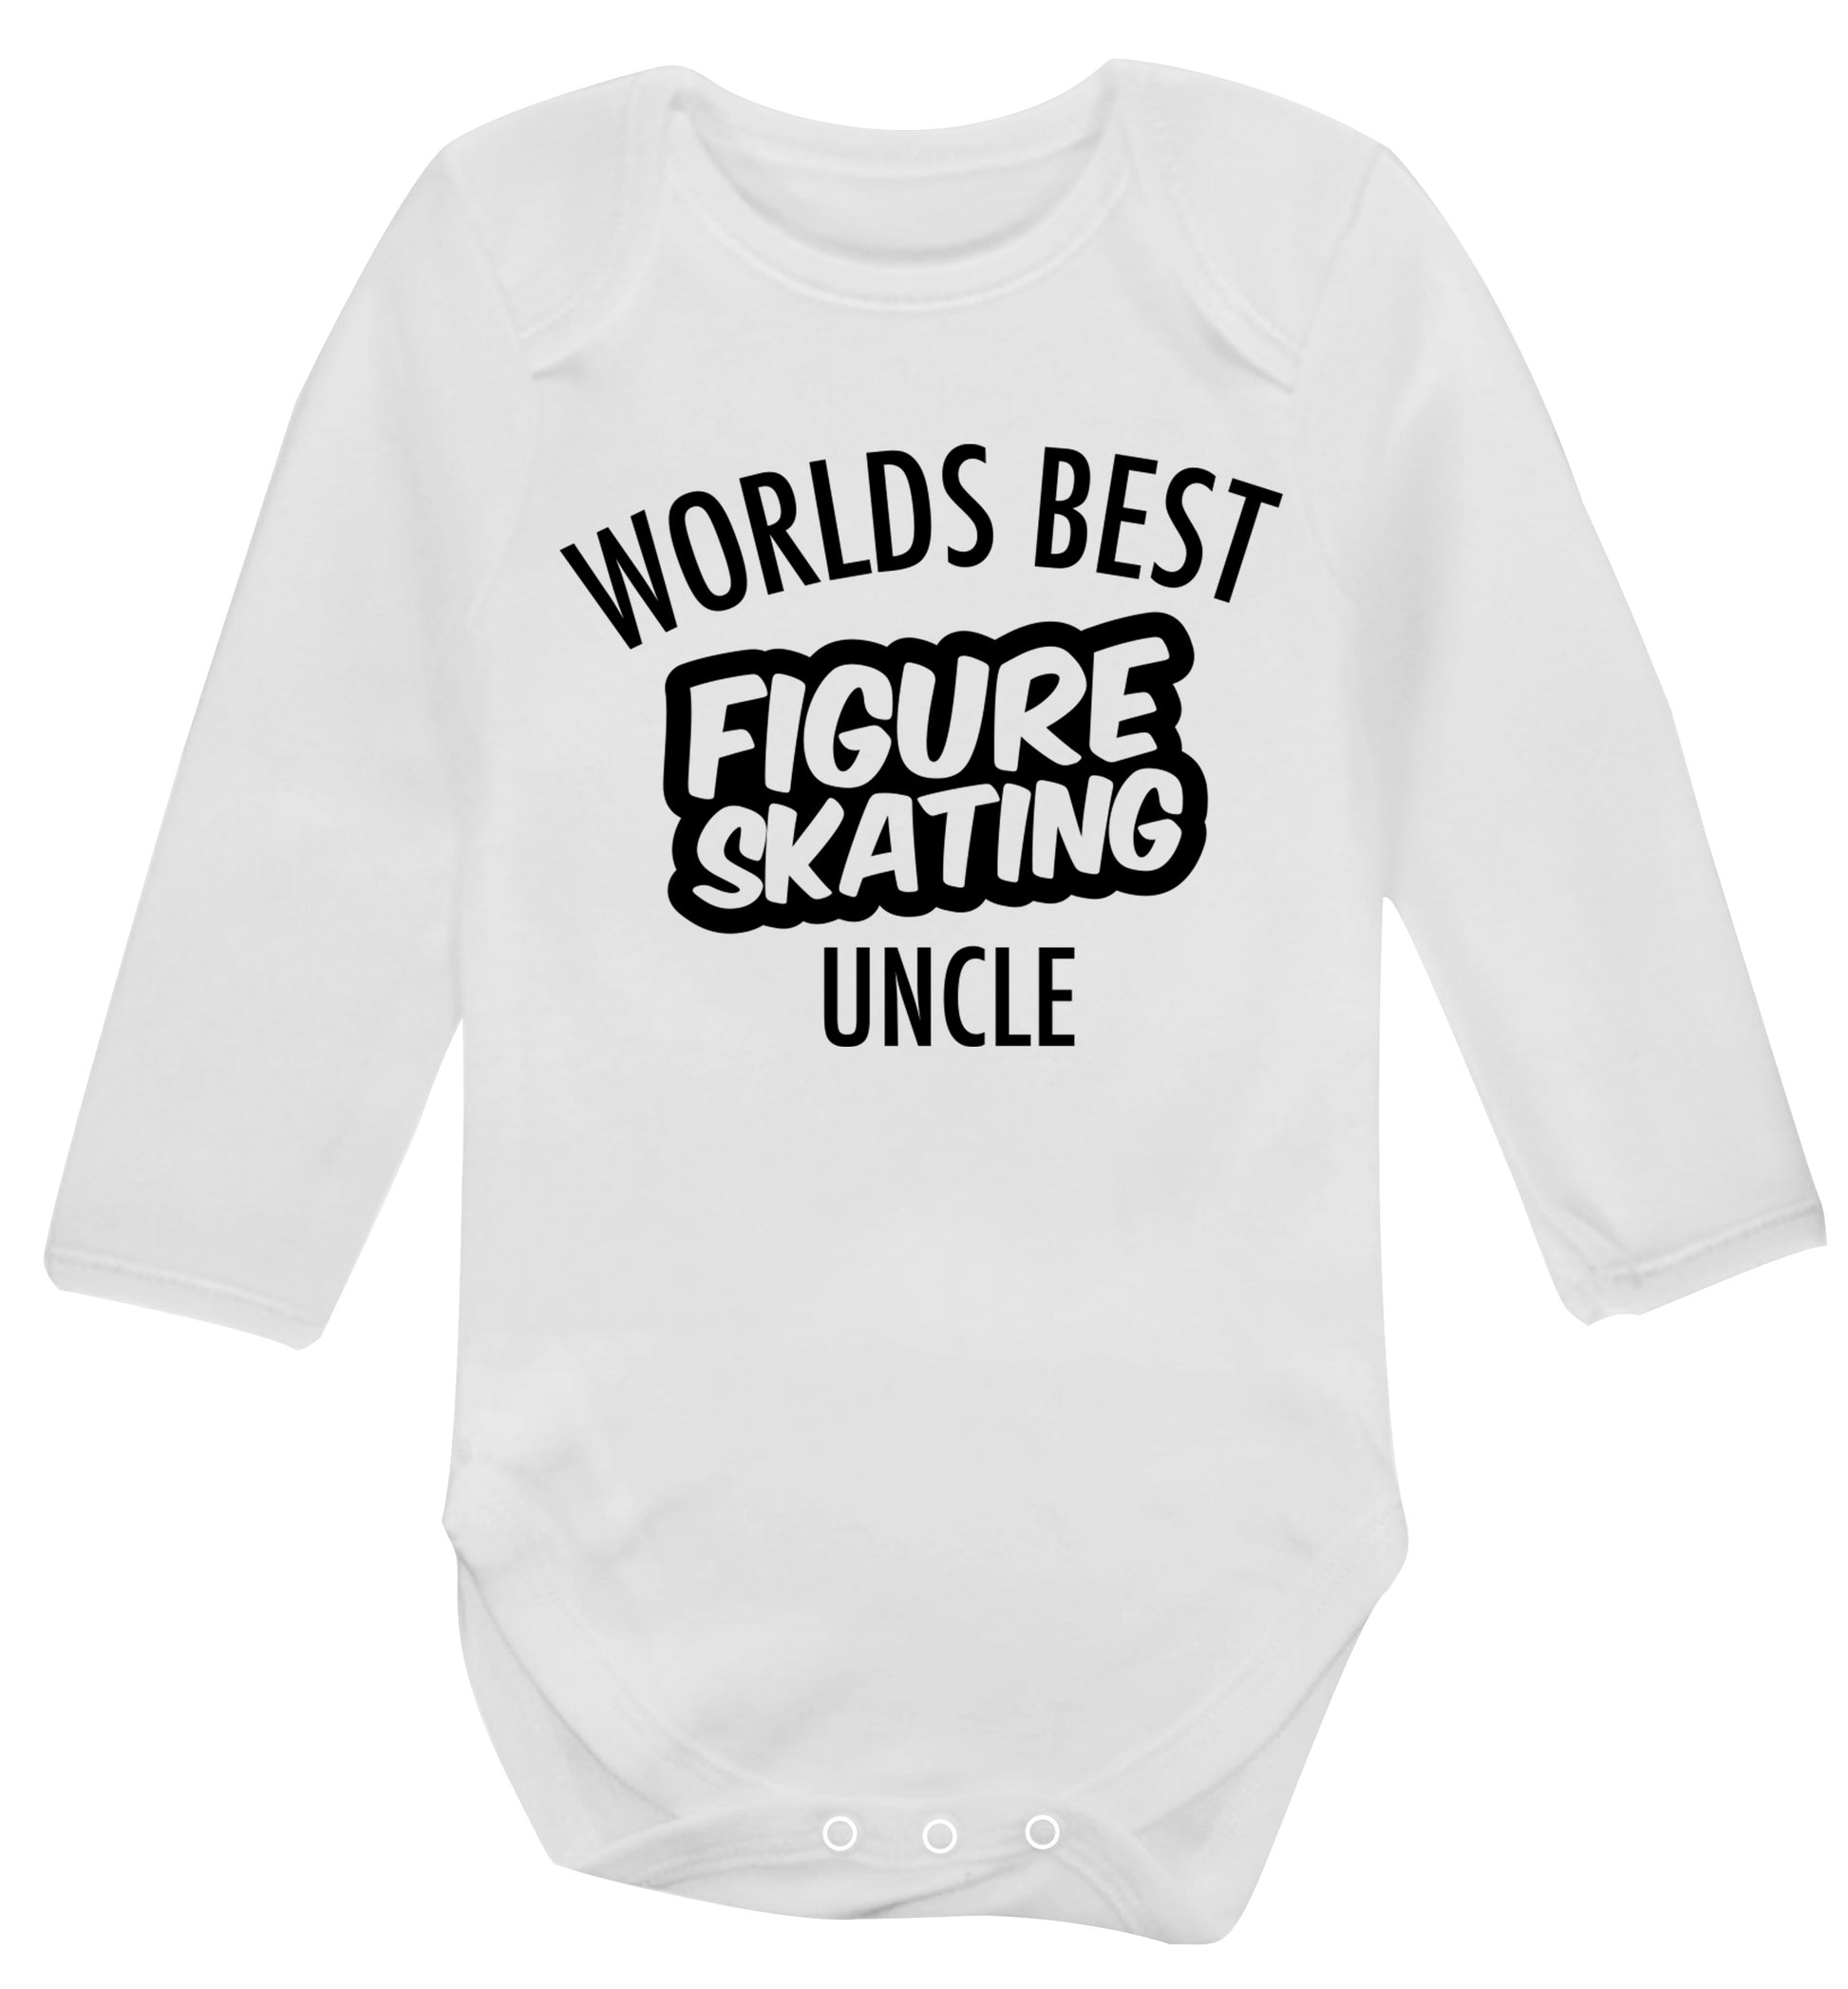 Worlds best figure skating uncle Baby Vest long sleeved white 6-12 months